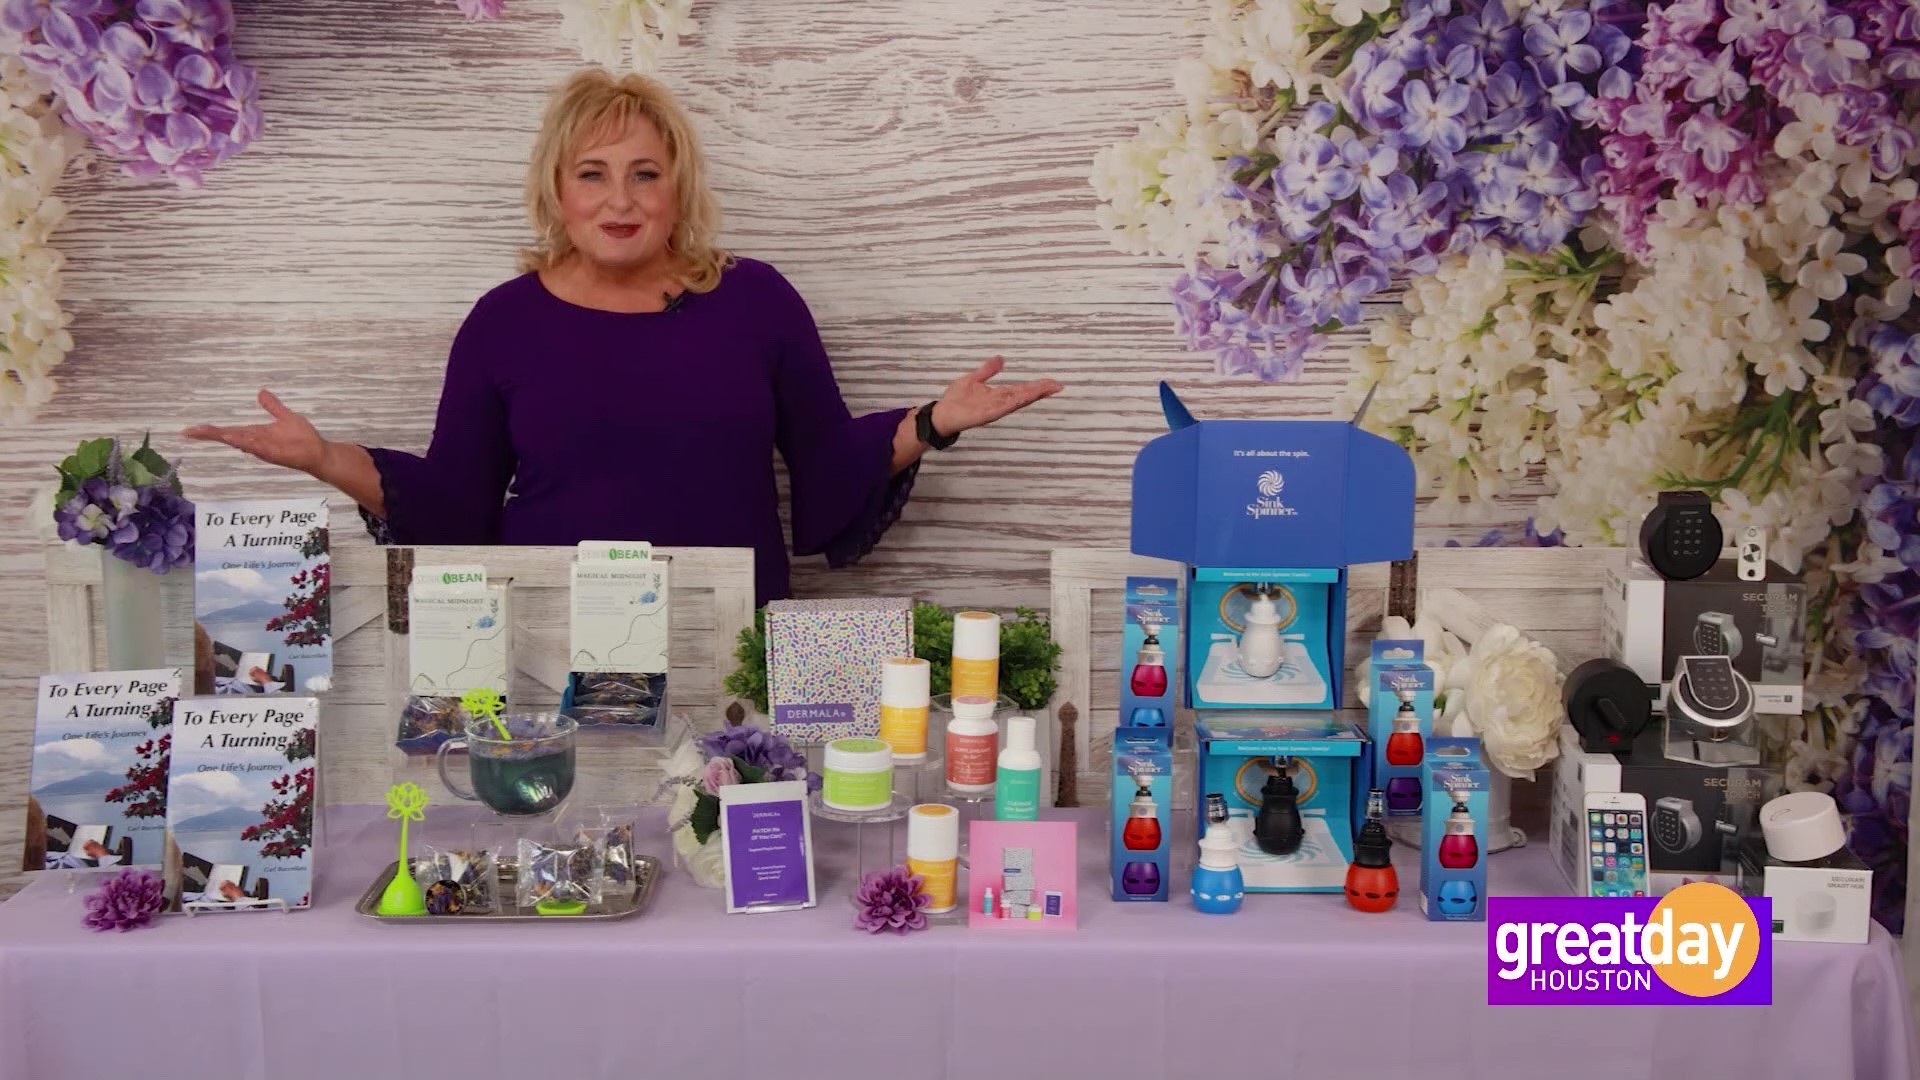 Beauty & Lifestyle Advisor, Dawn McCarthy, shows us her favorite products for self-care!